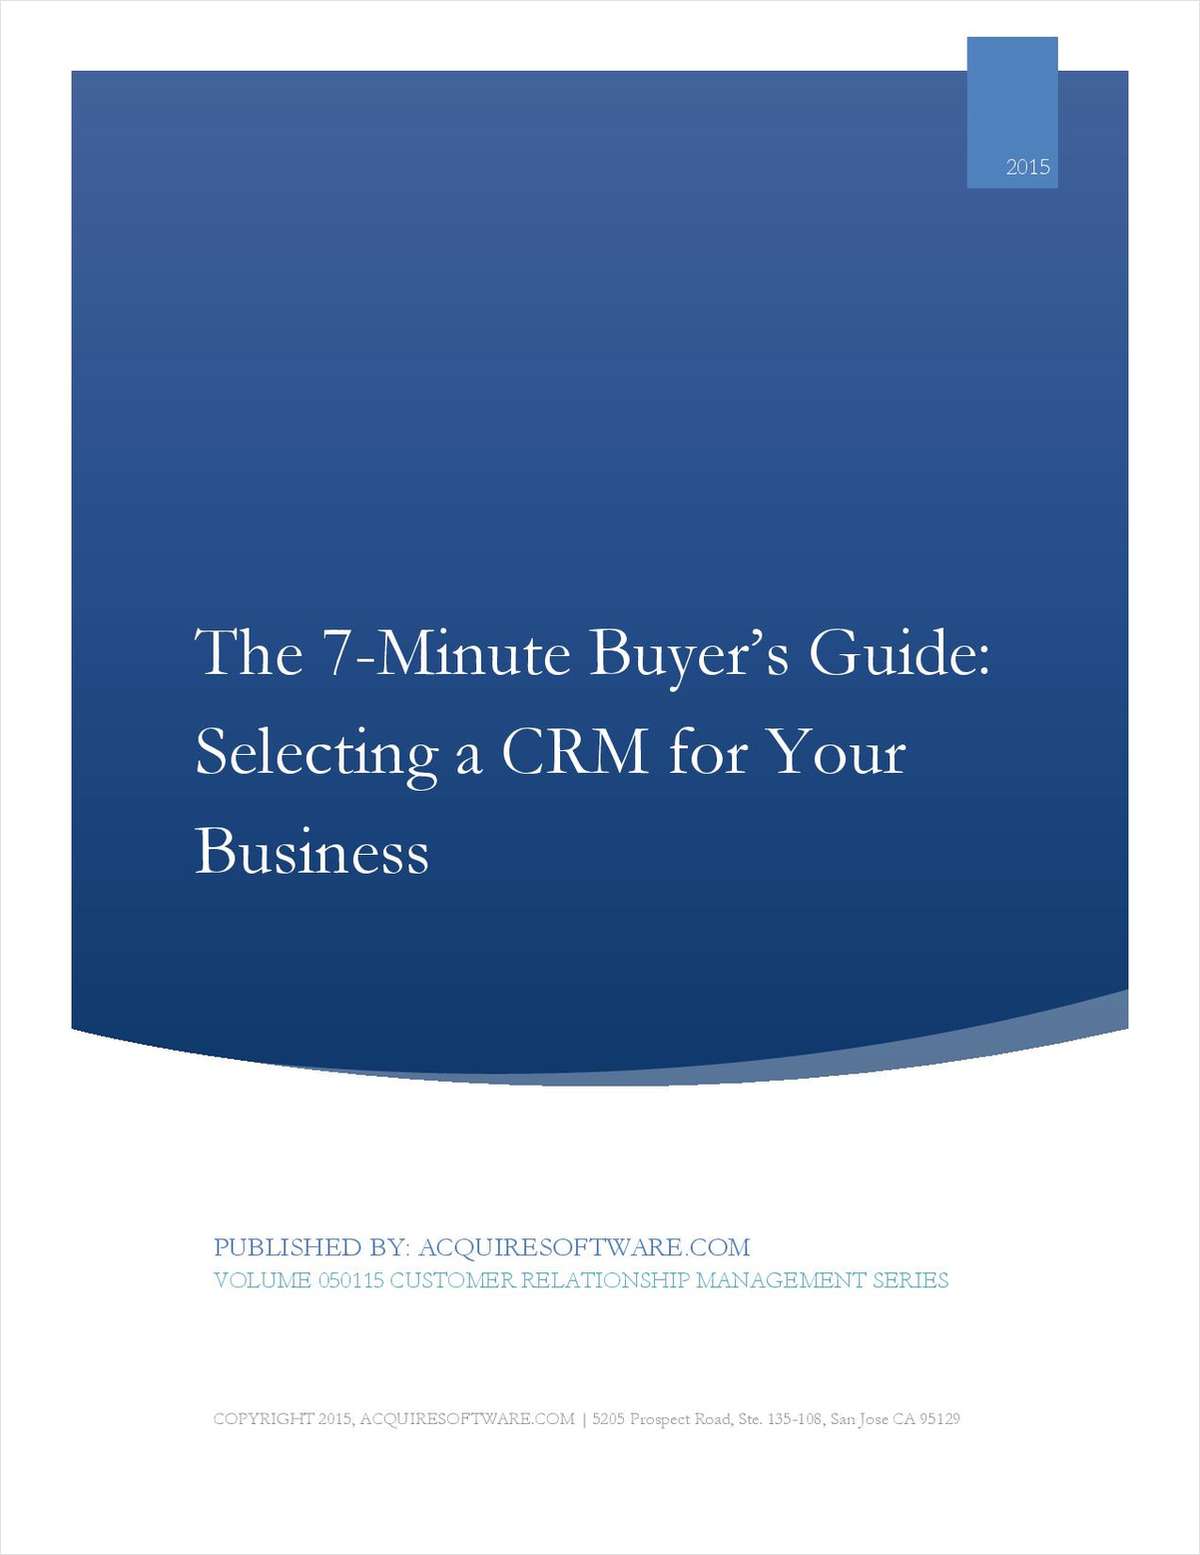 7 Minute Buyer's Guide: Identifying and Selecting the Right Sales and Customer Management CRM for Your Business.